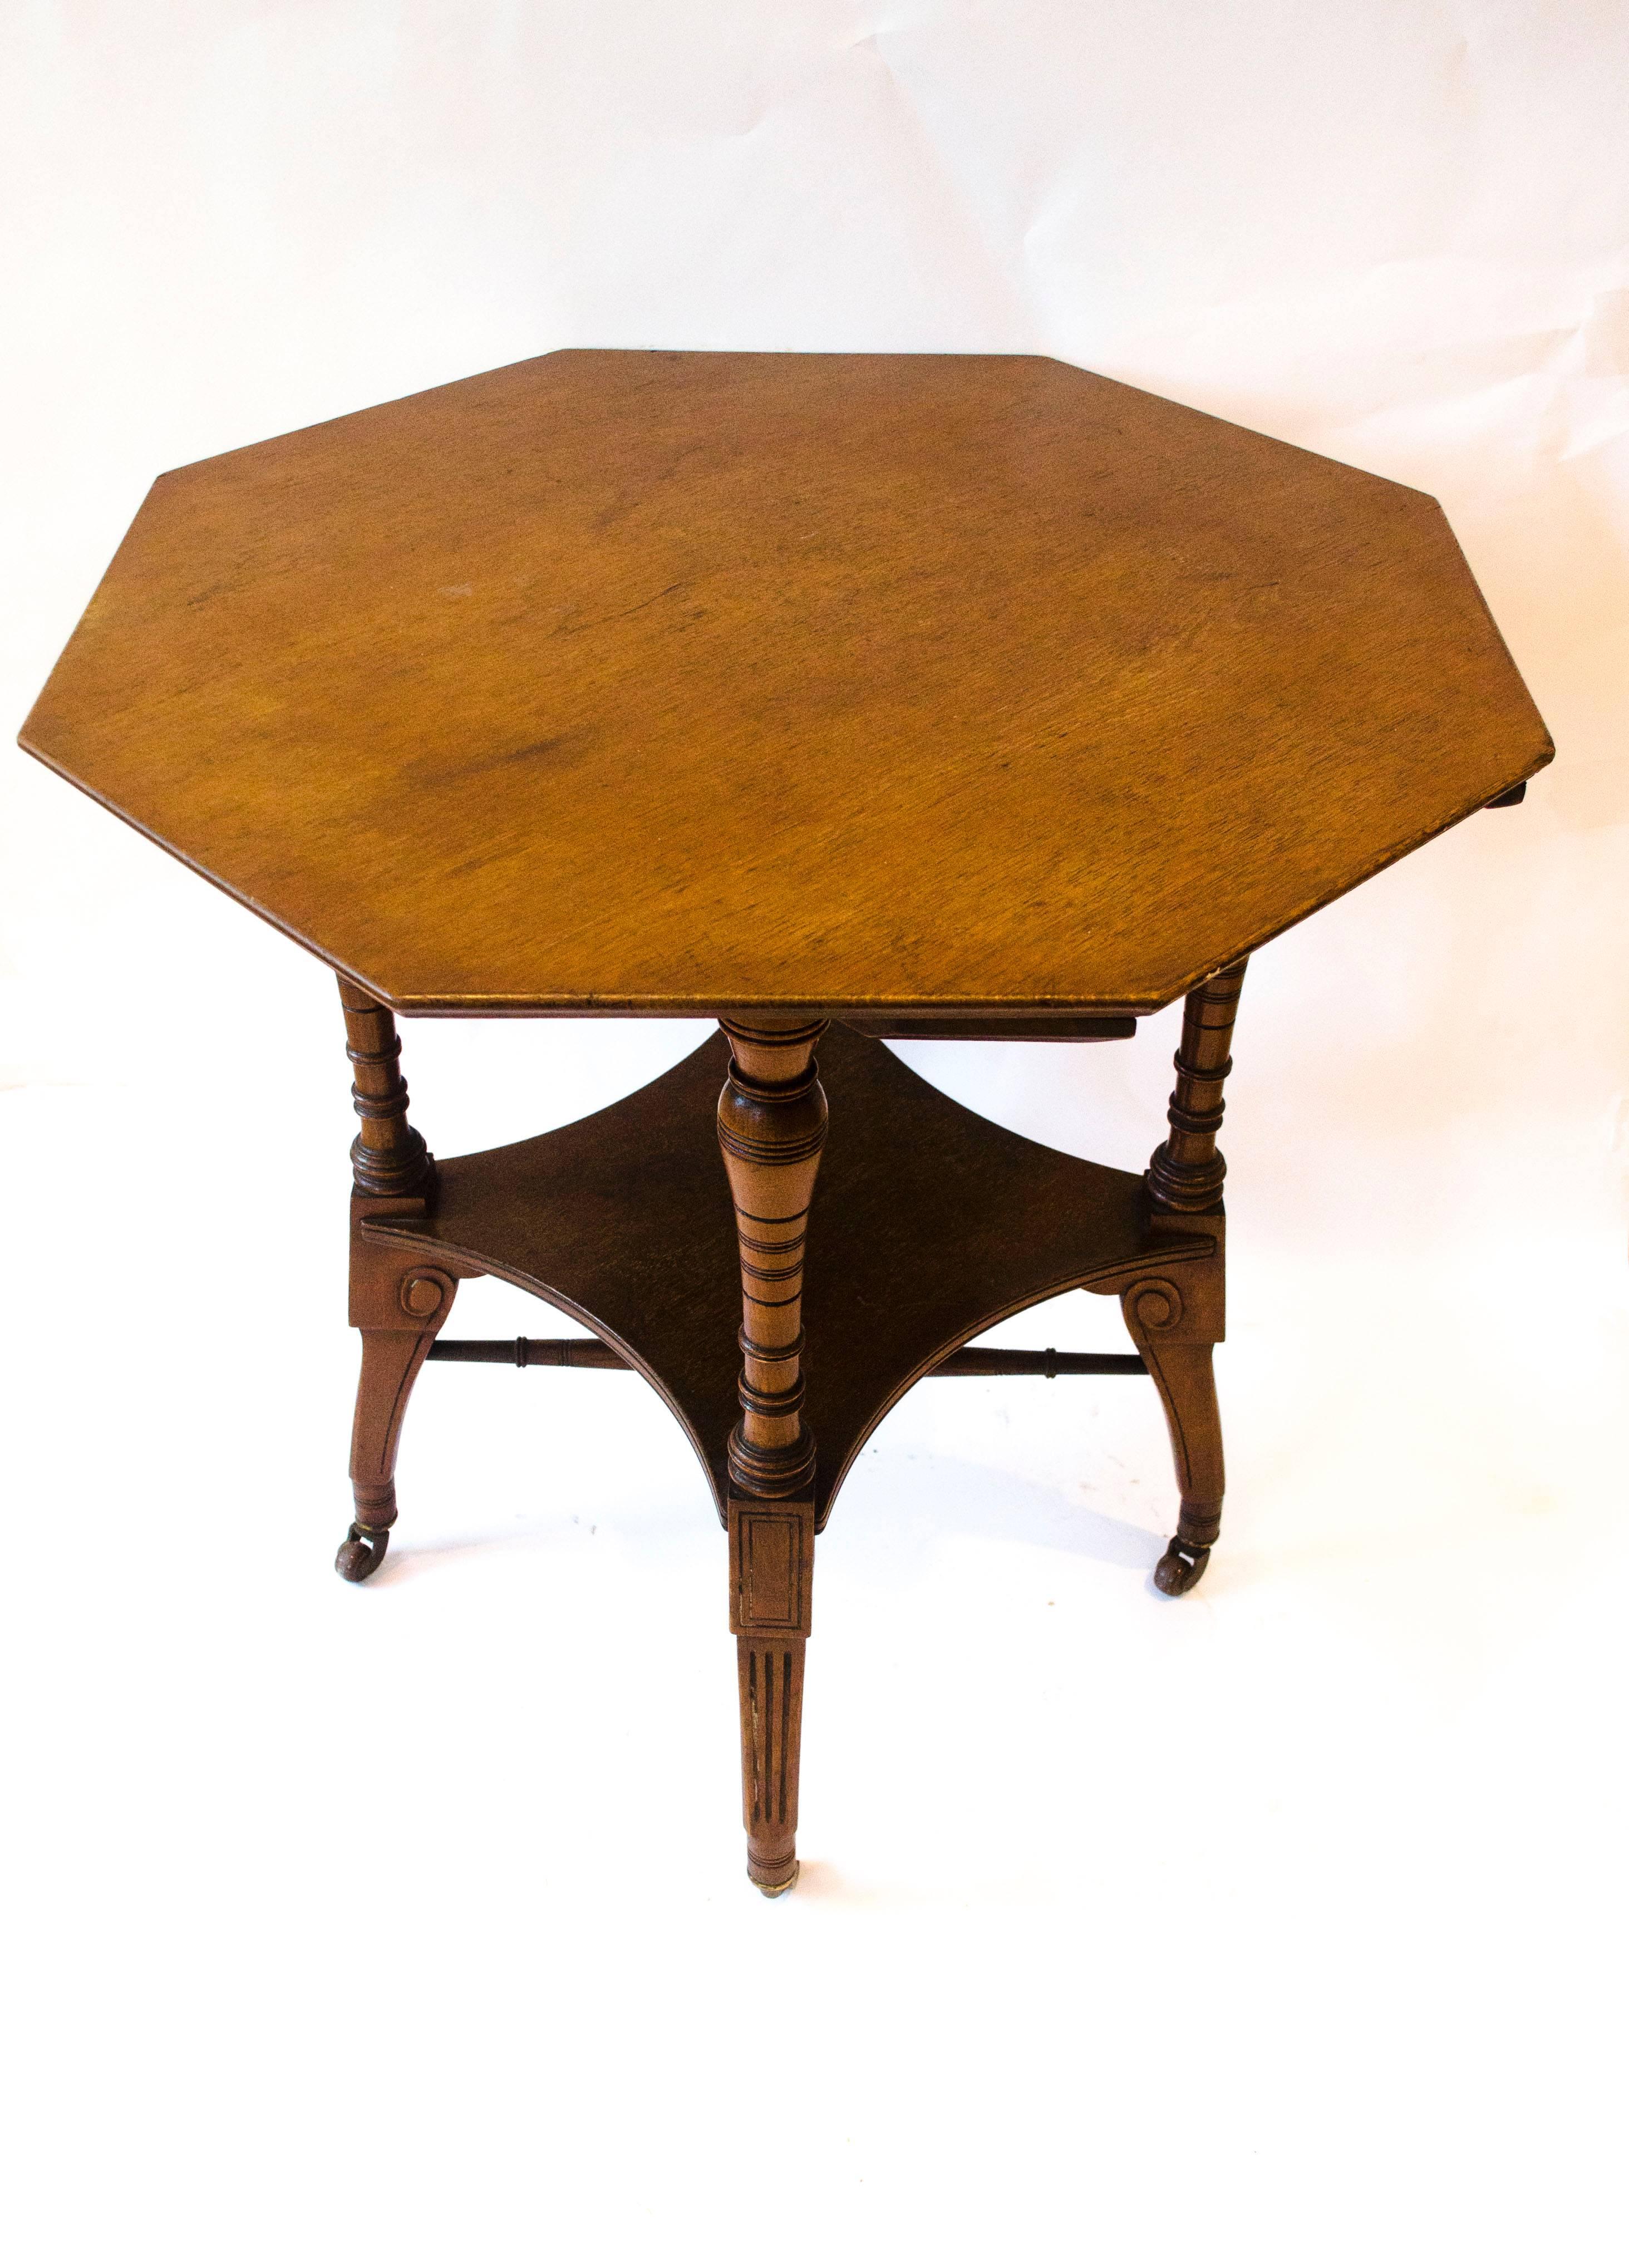 Arts and Crafts Jas Shoolbred Aesthetic Movement Walnut Octagonal Center Table